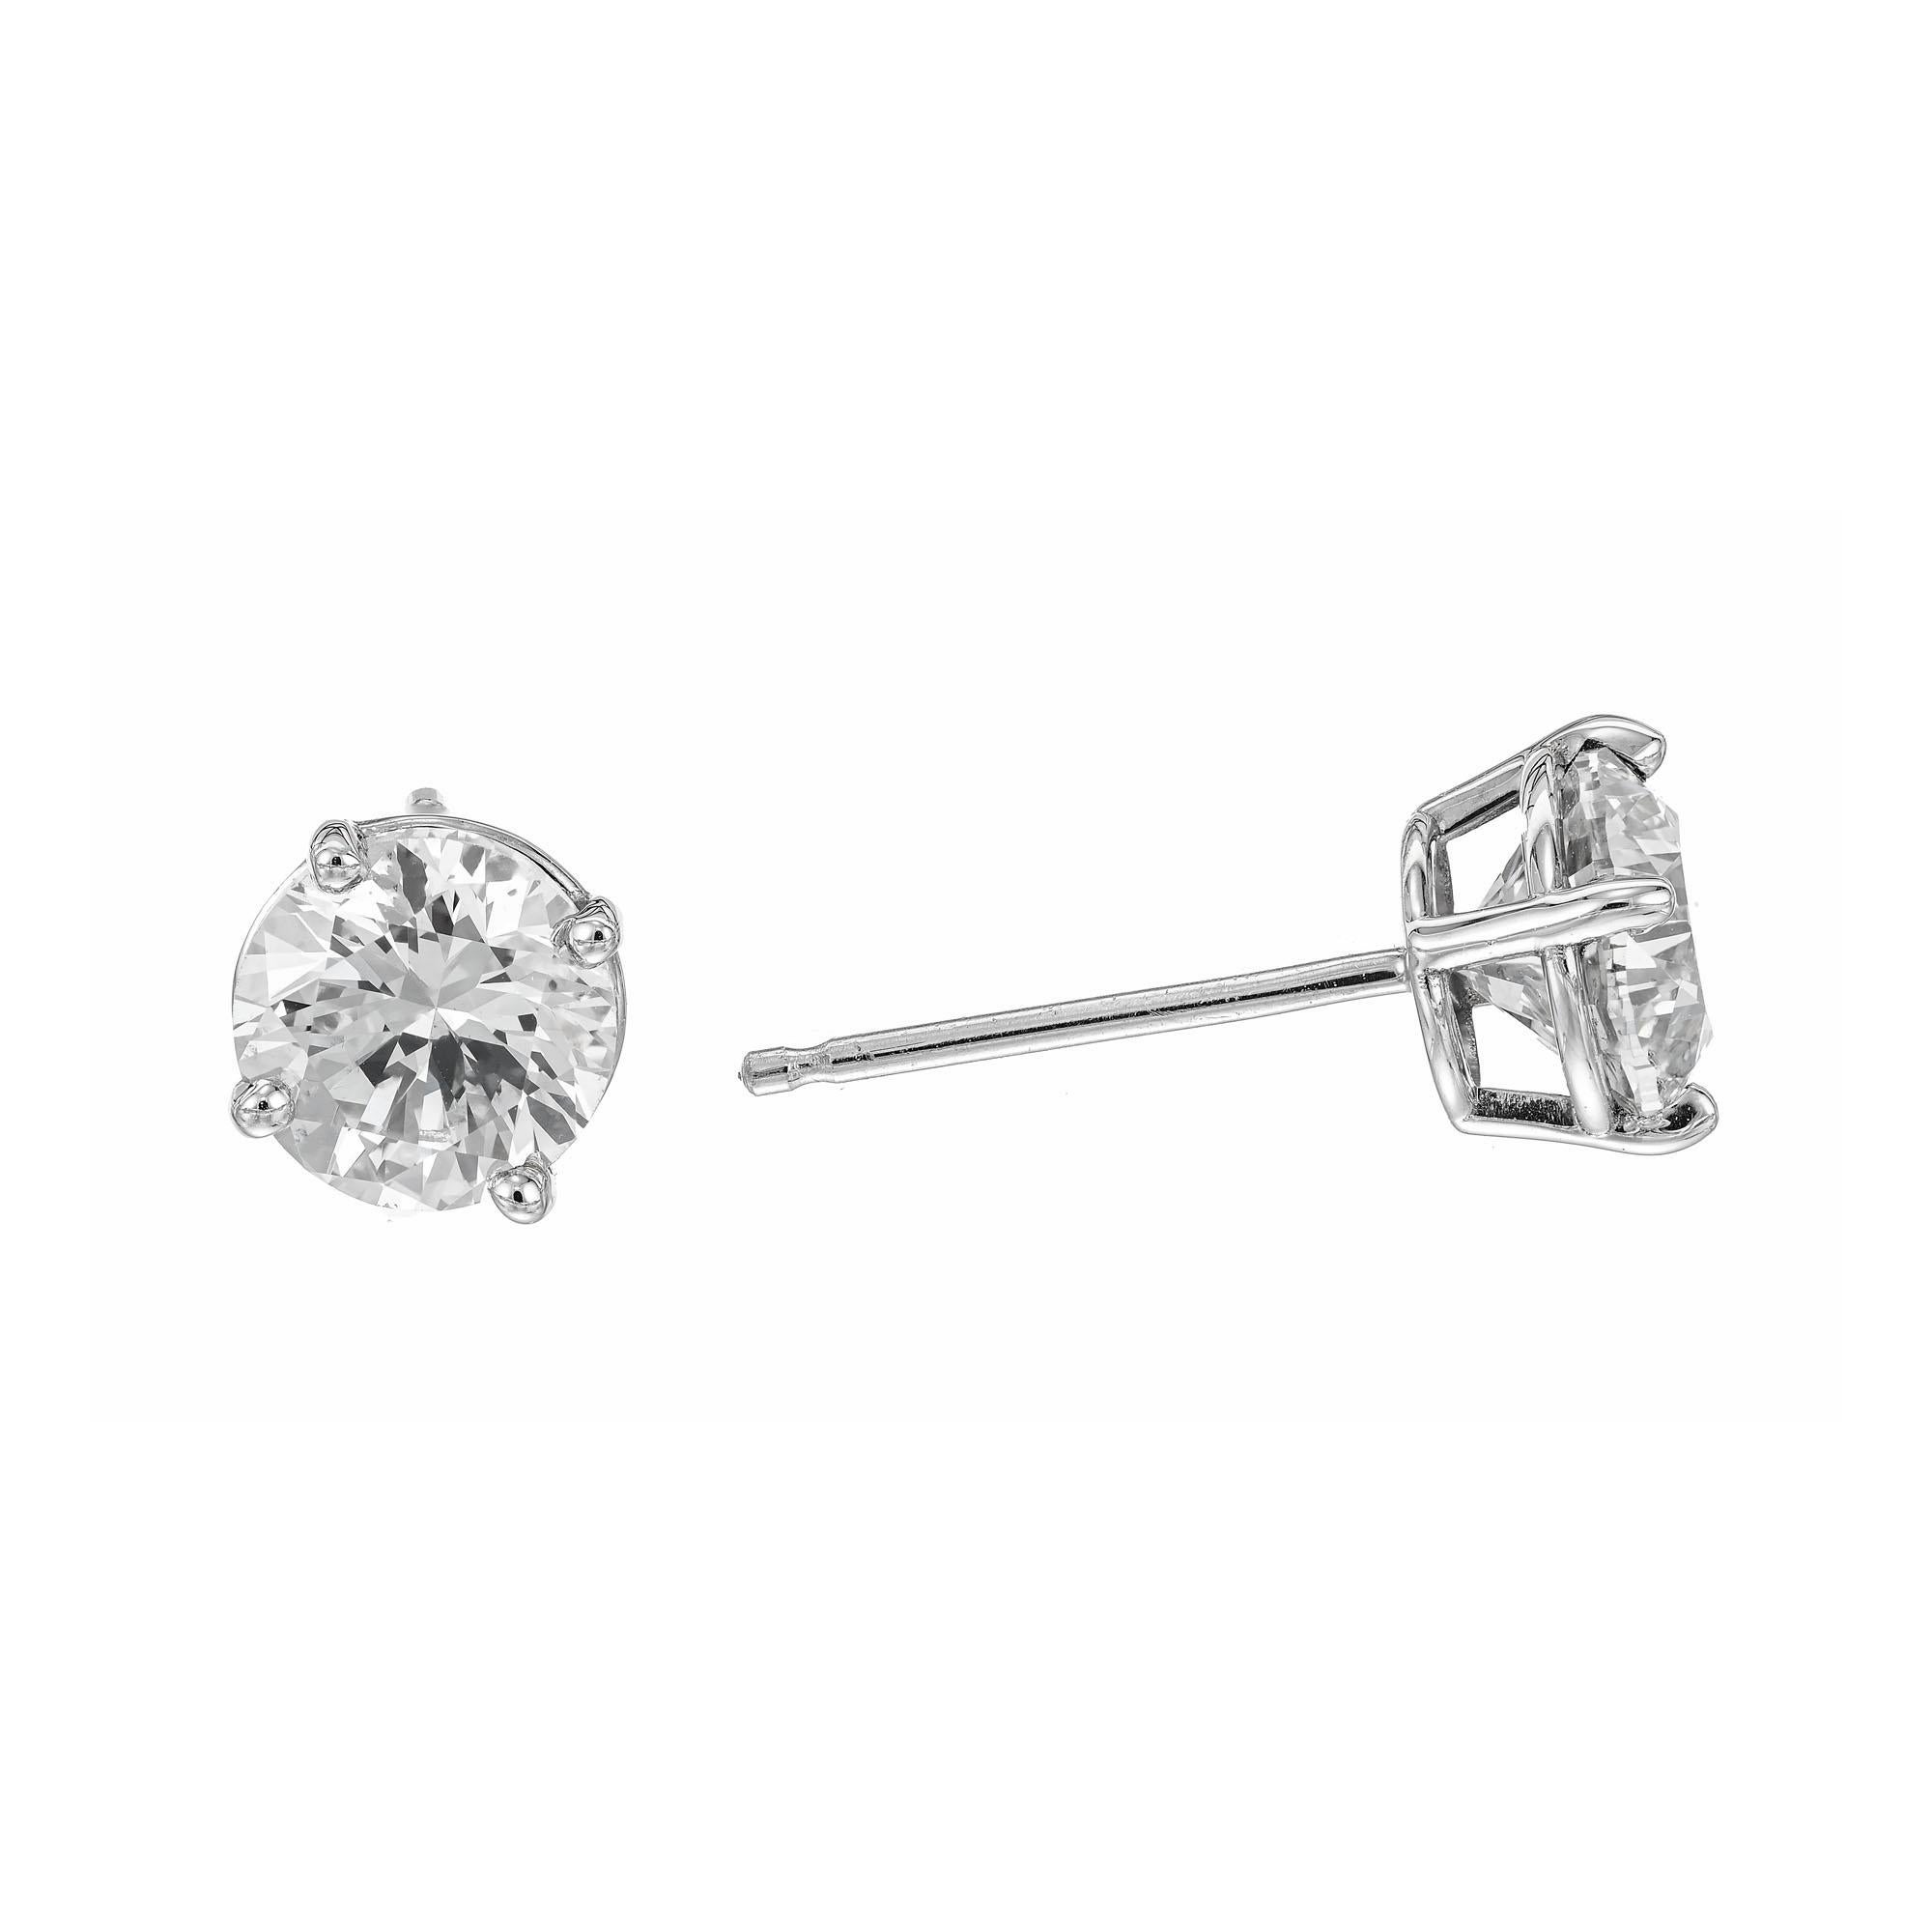 Peter Suchy GIA Certified 2.01 Carat Diamond Platinum Stud Earrings For Sale 1